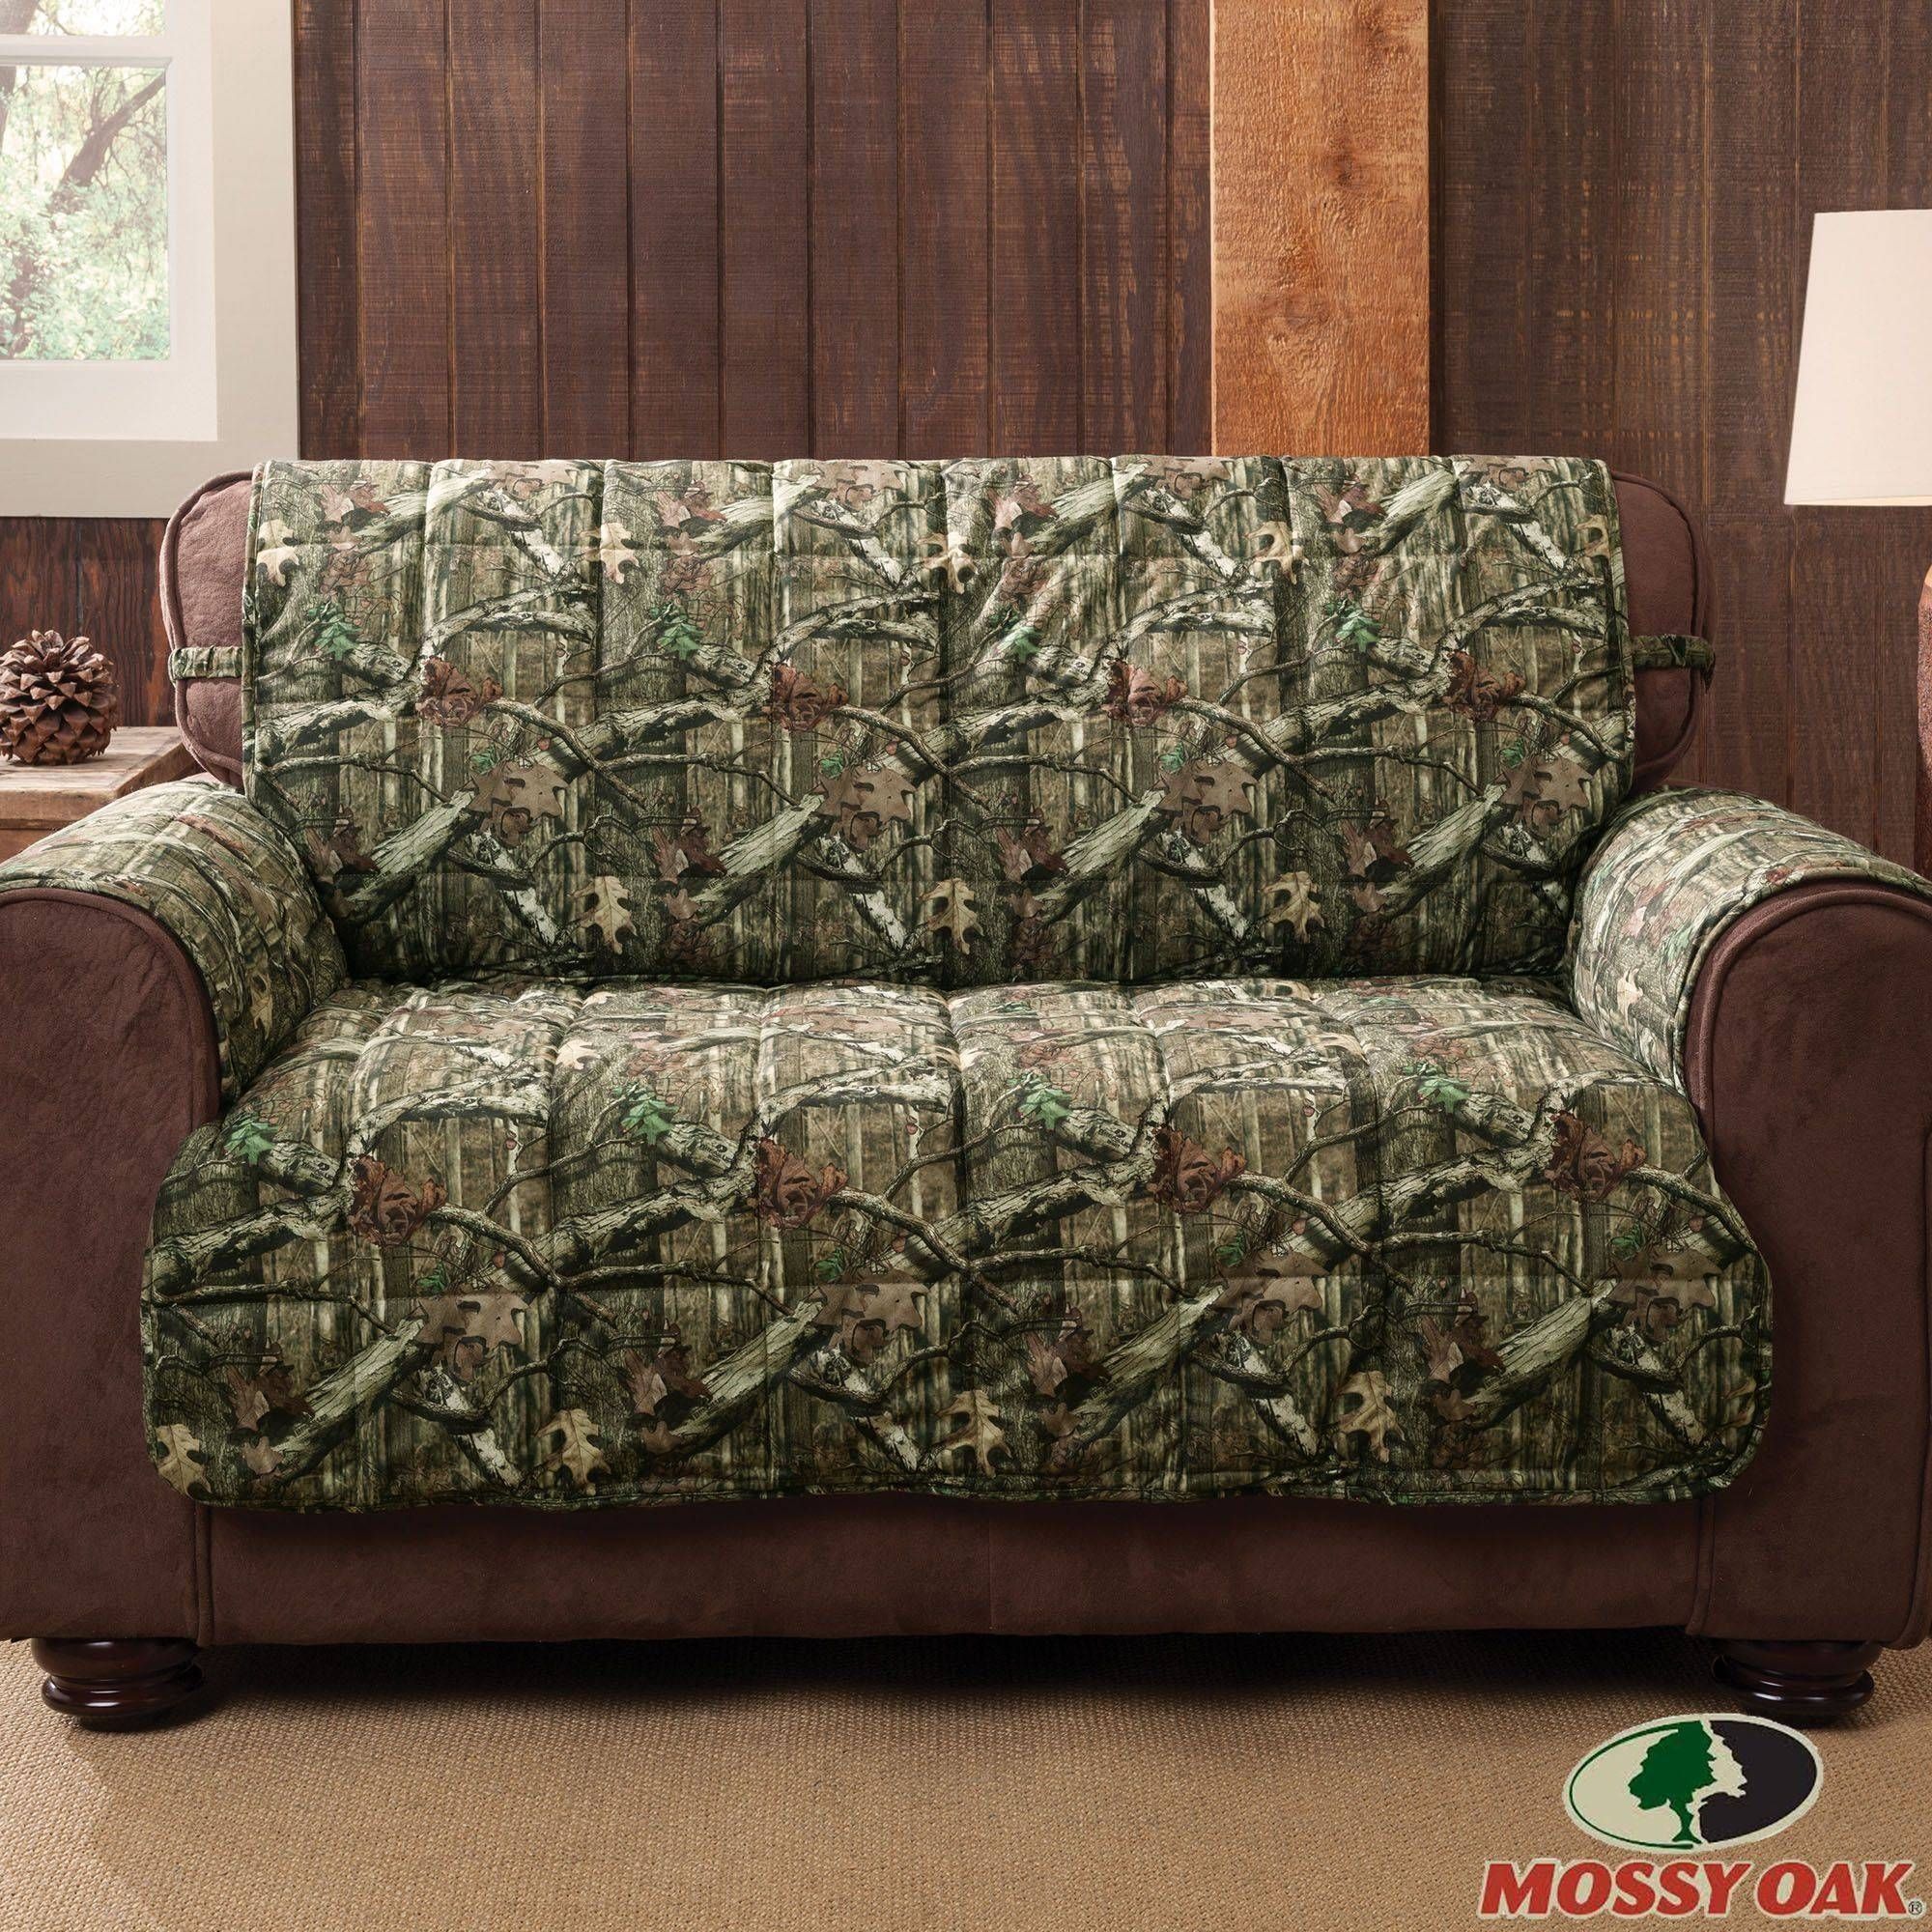 Mossy Oak Break Up Infinity Camo Furniture Protectors Throughout Camo Sofa Cover (View 8 of 30)